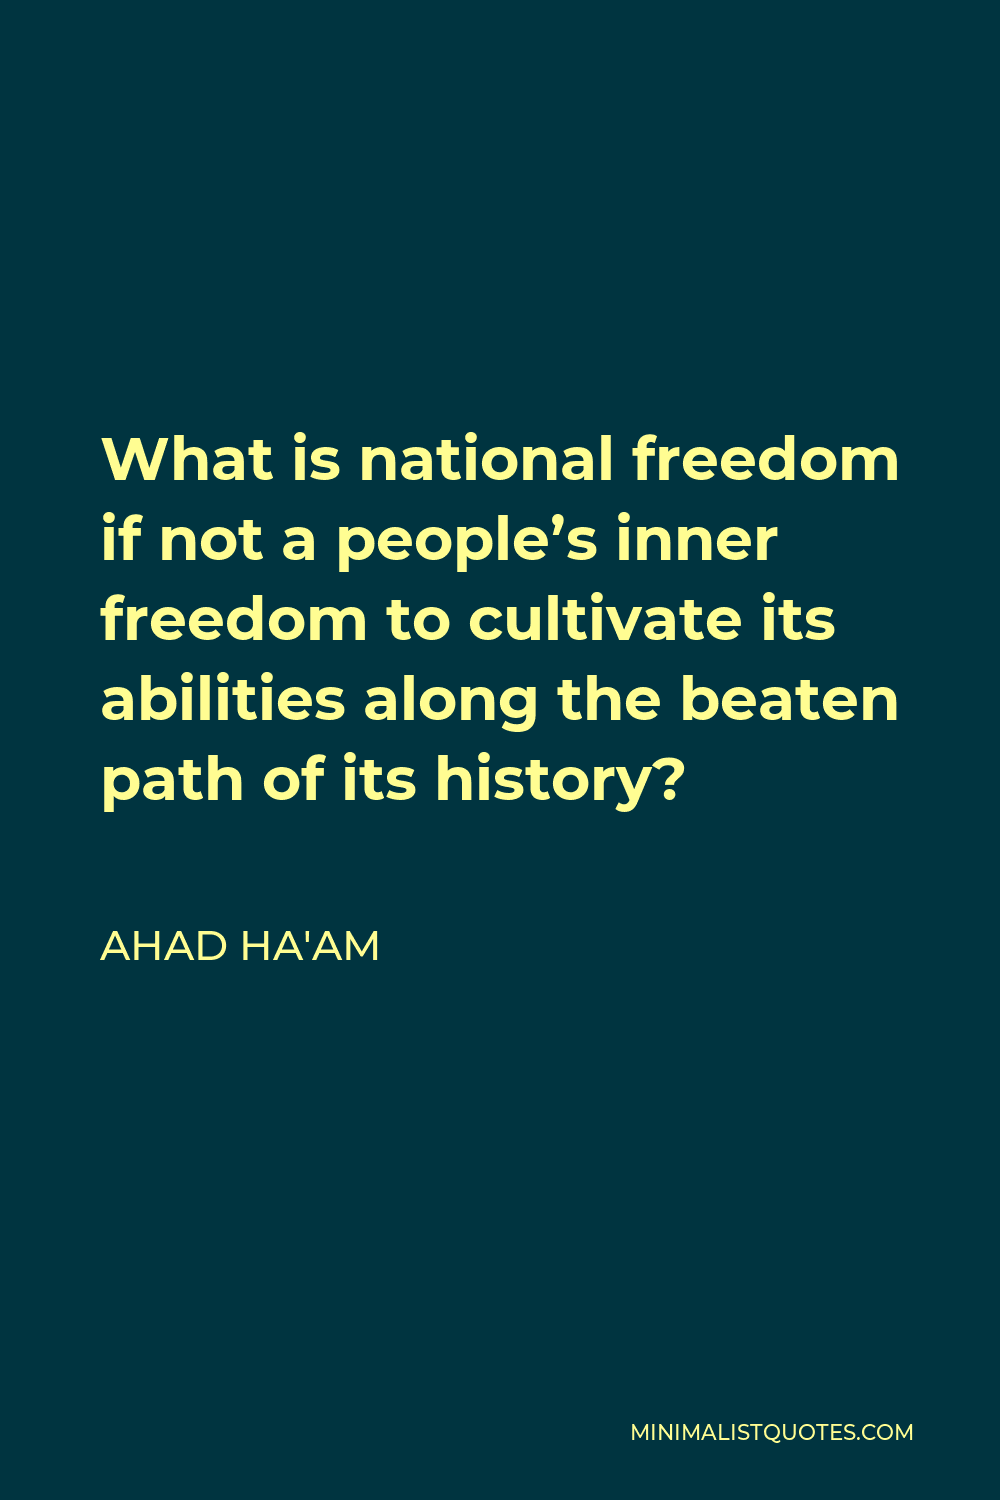 Ahad Ha'am Quote - What is national freedom if not a people’s inner freedom to cultivate its abilities along the beaten path of its history?